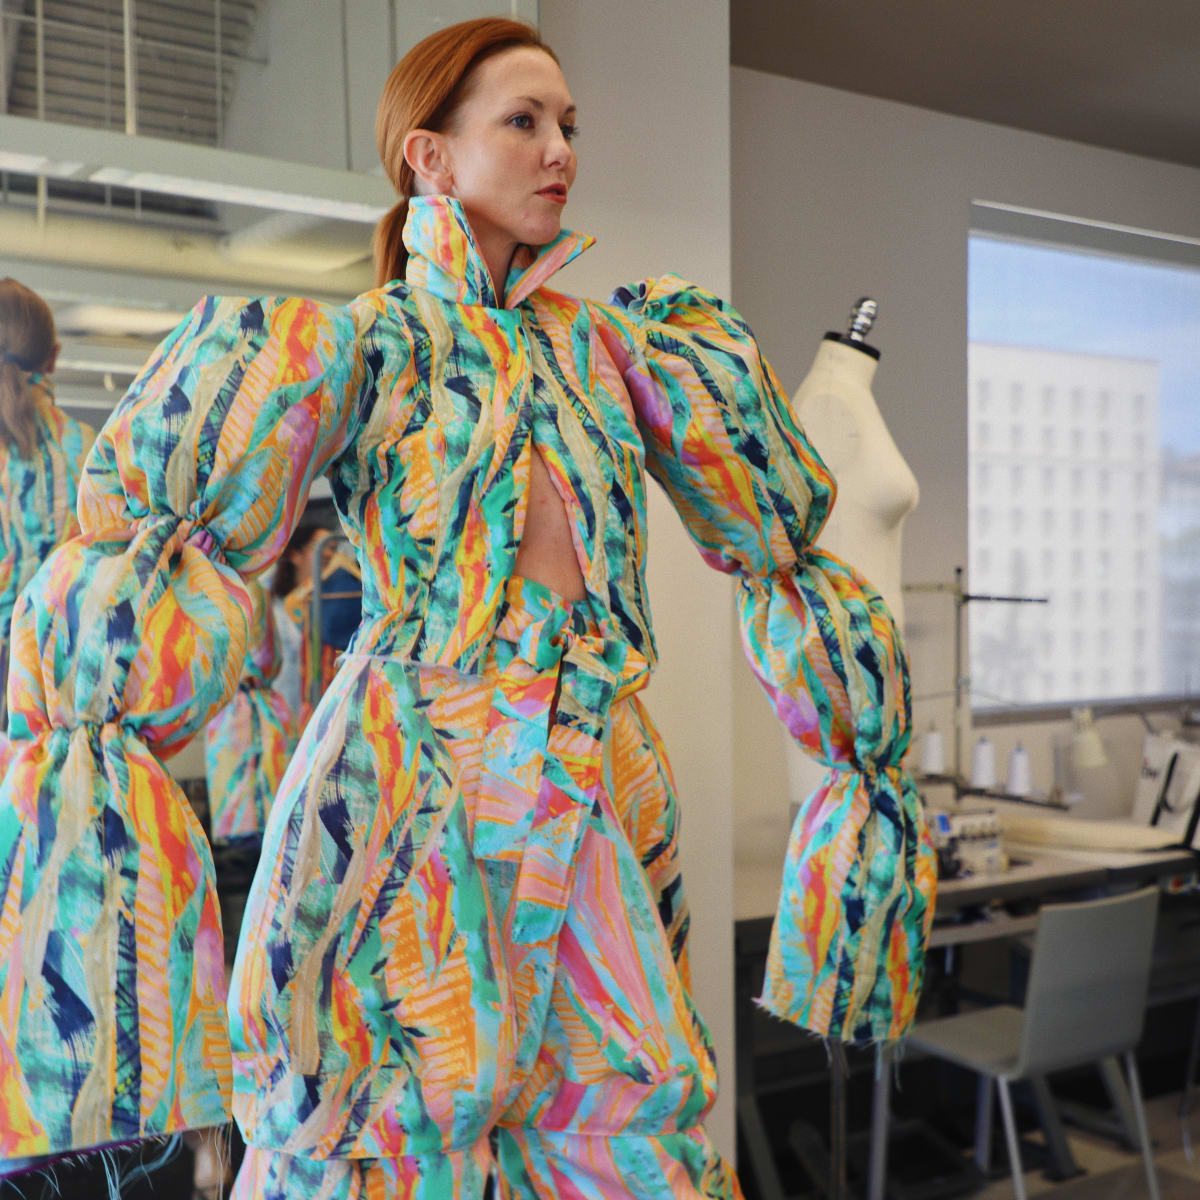 FIDM Students Work With the San Diego Padres, Latest News